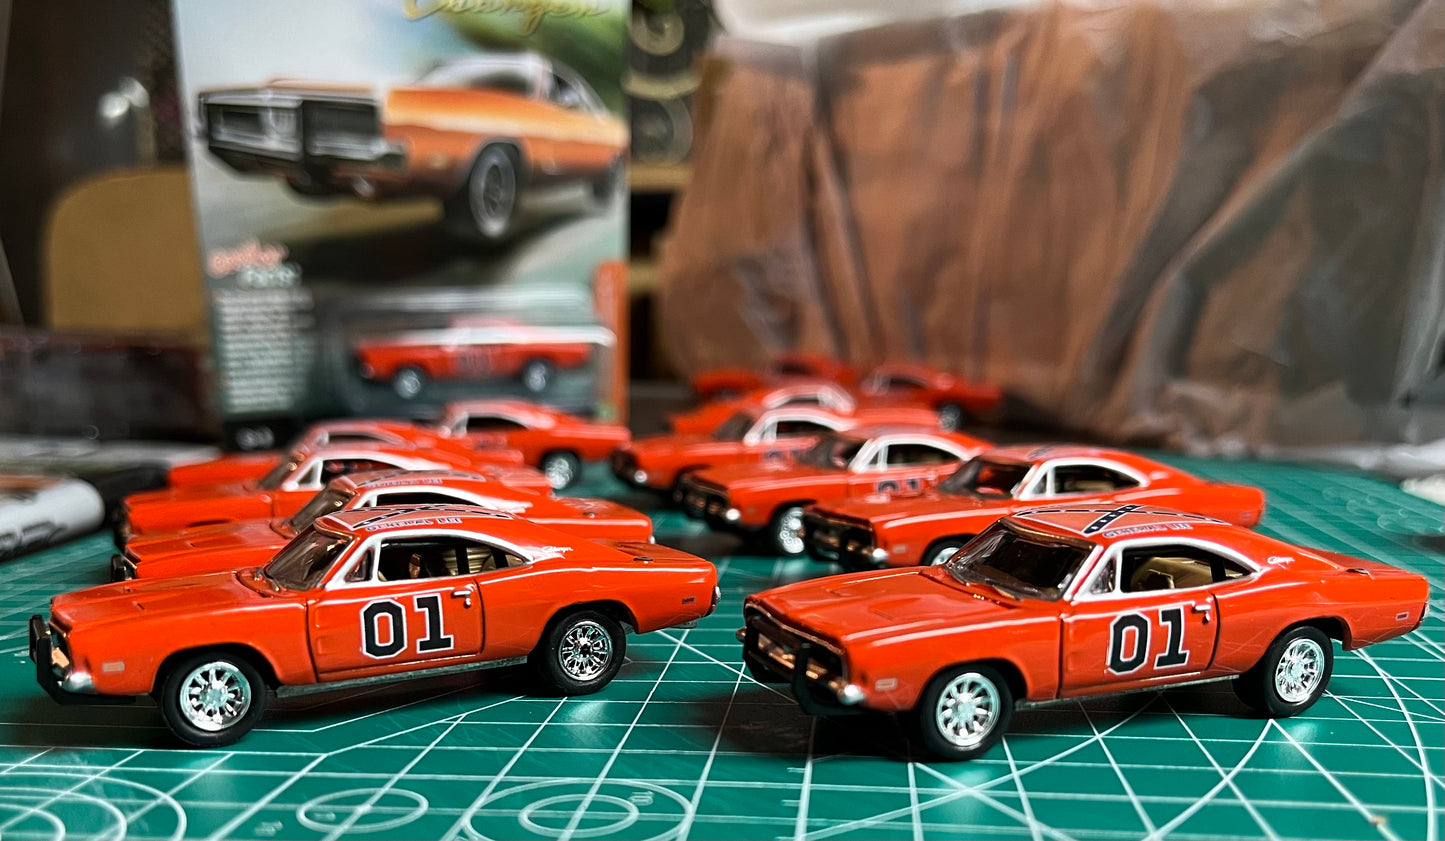 1/64 GENERAL LEE Johnny Lightning (New England Dukes Exclusive) PREORDER JULY